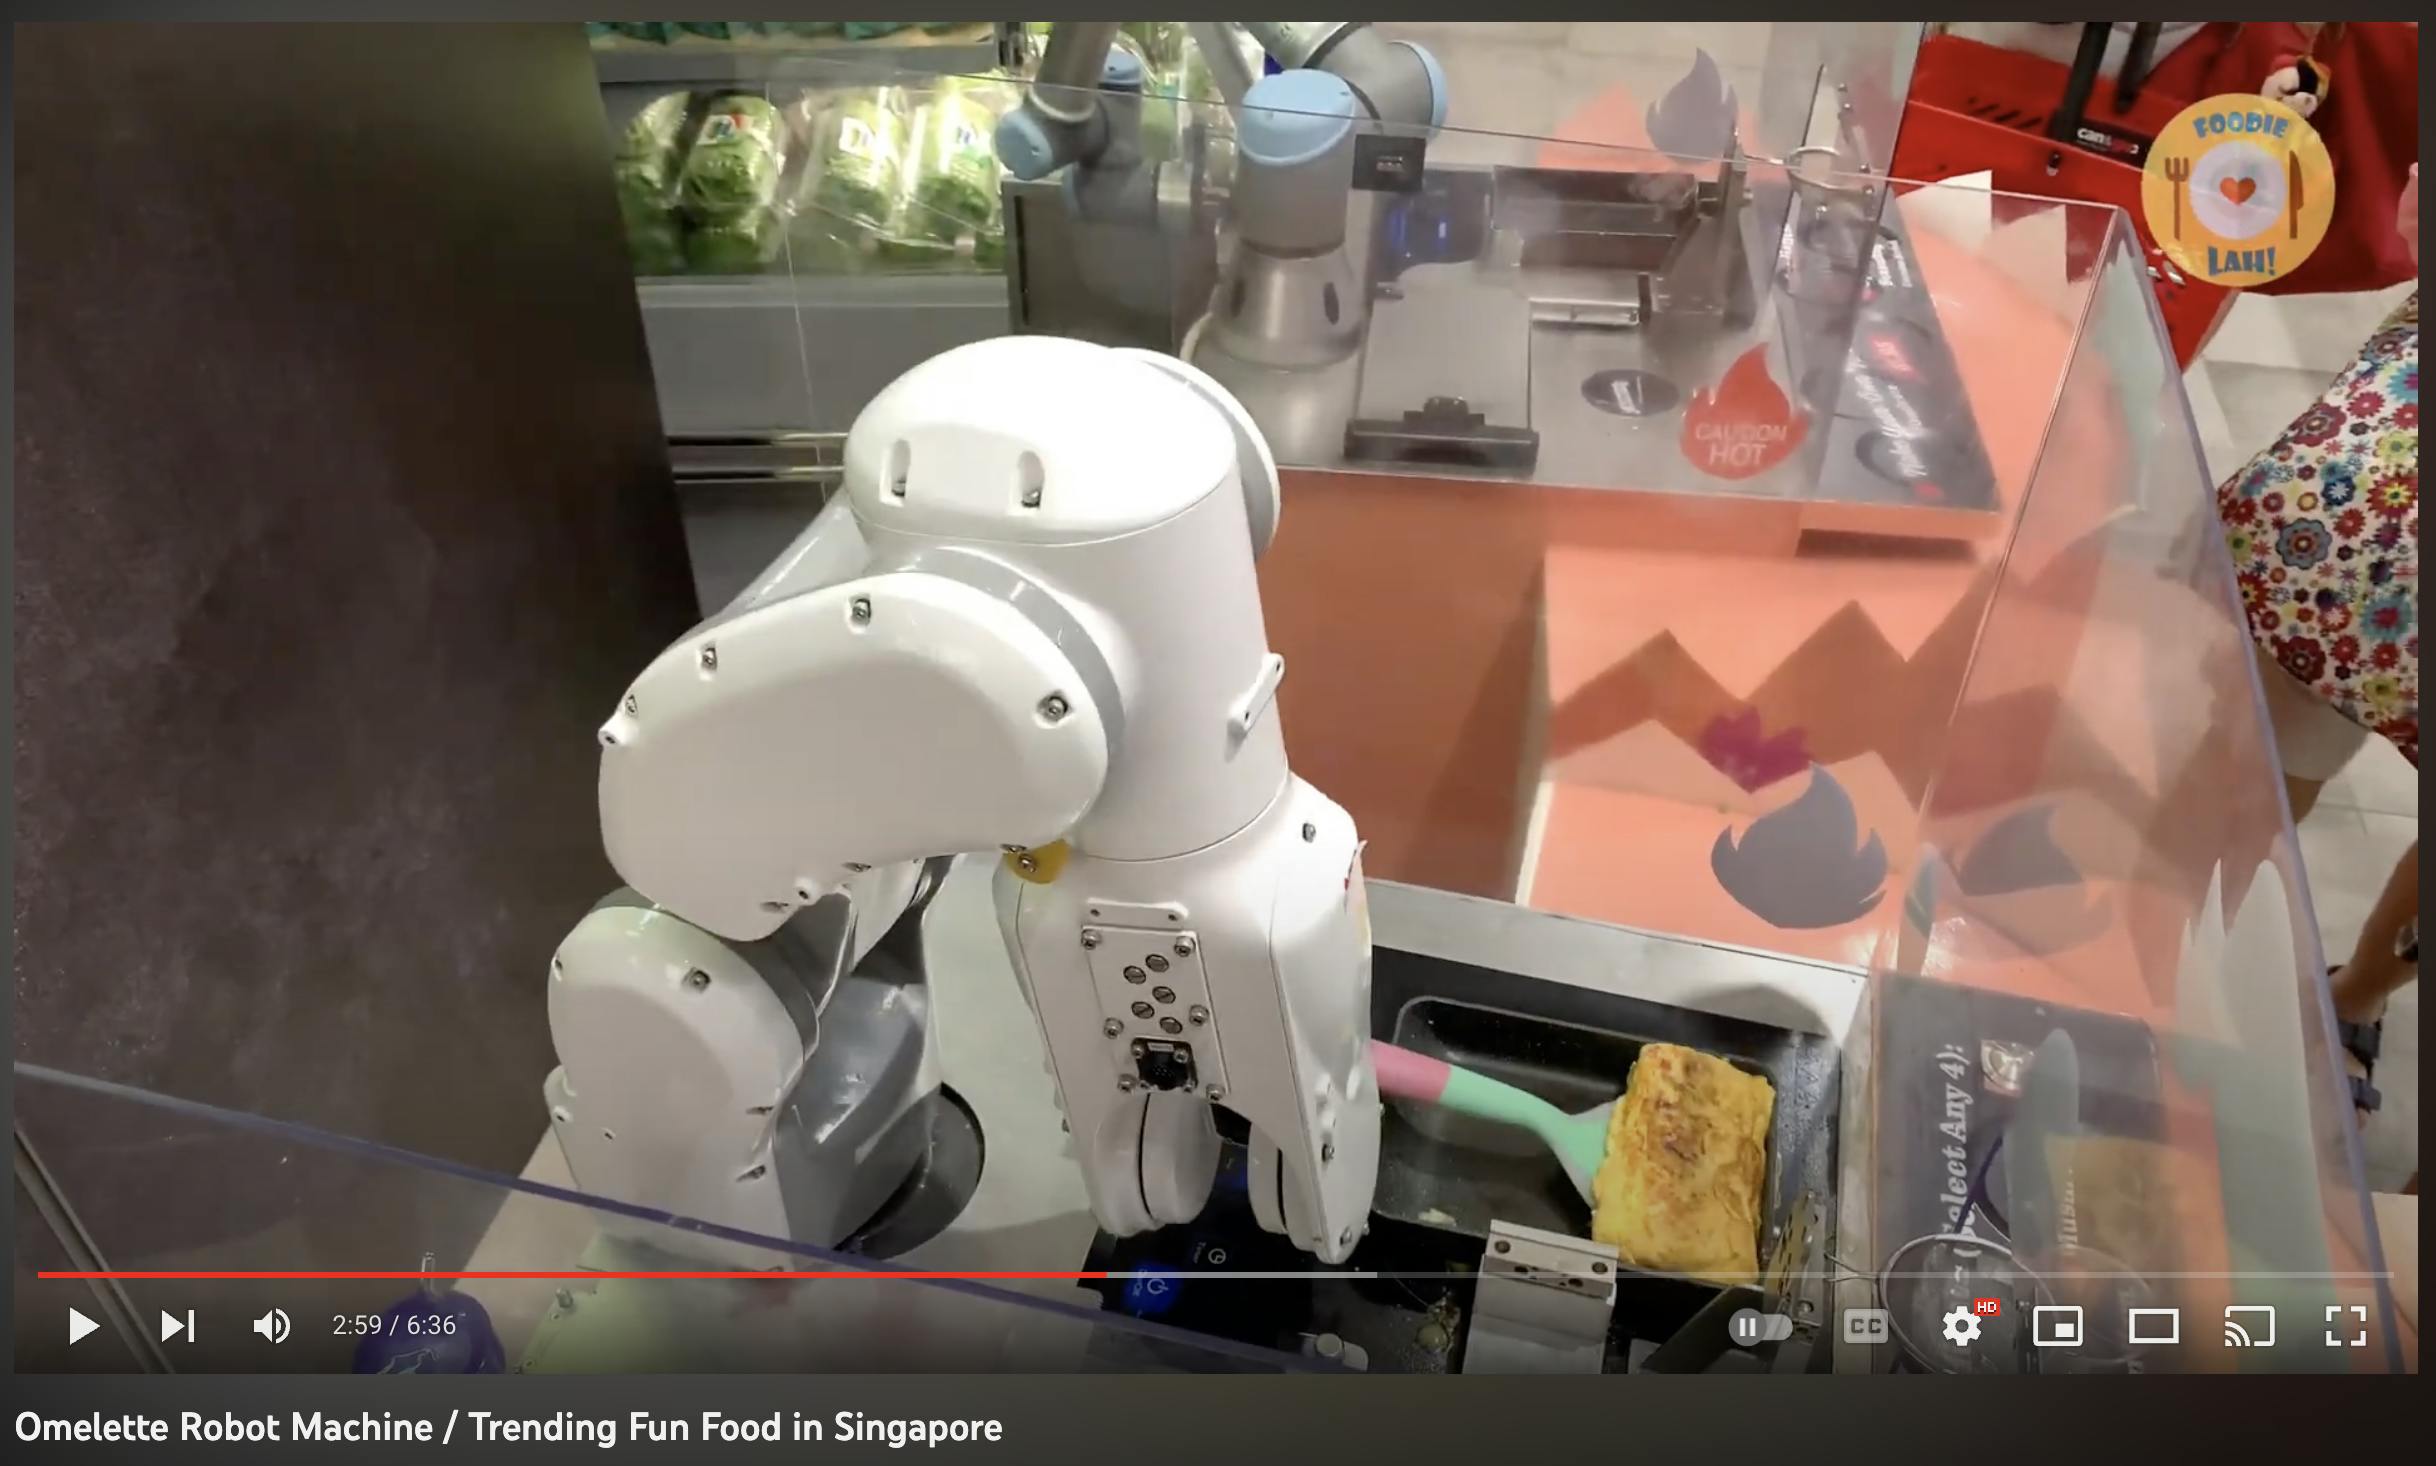 A screenshot of a YouTube video featuring a robotic arm that serves omelets.